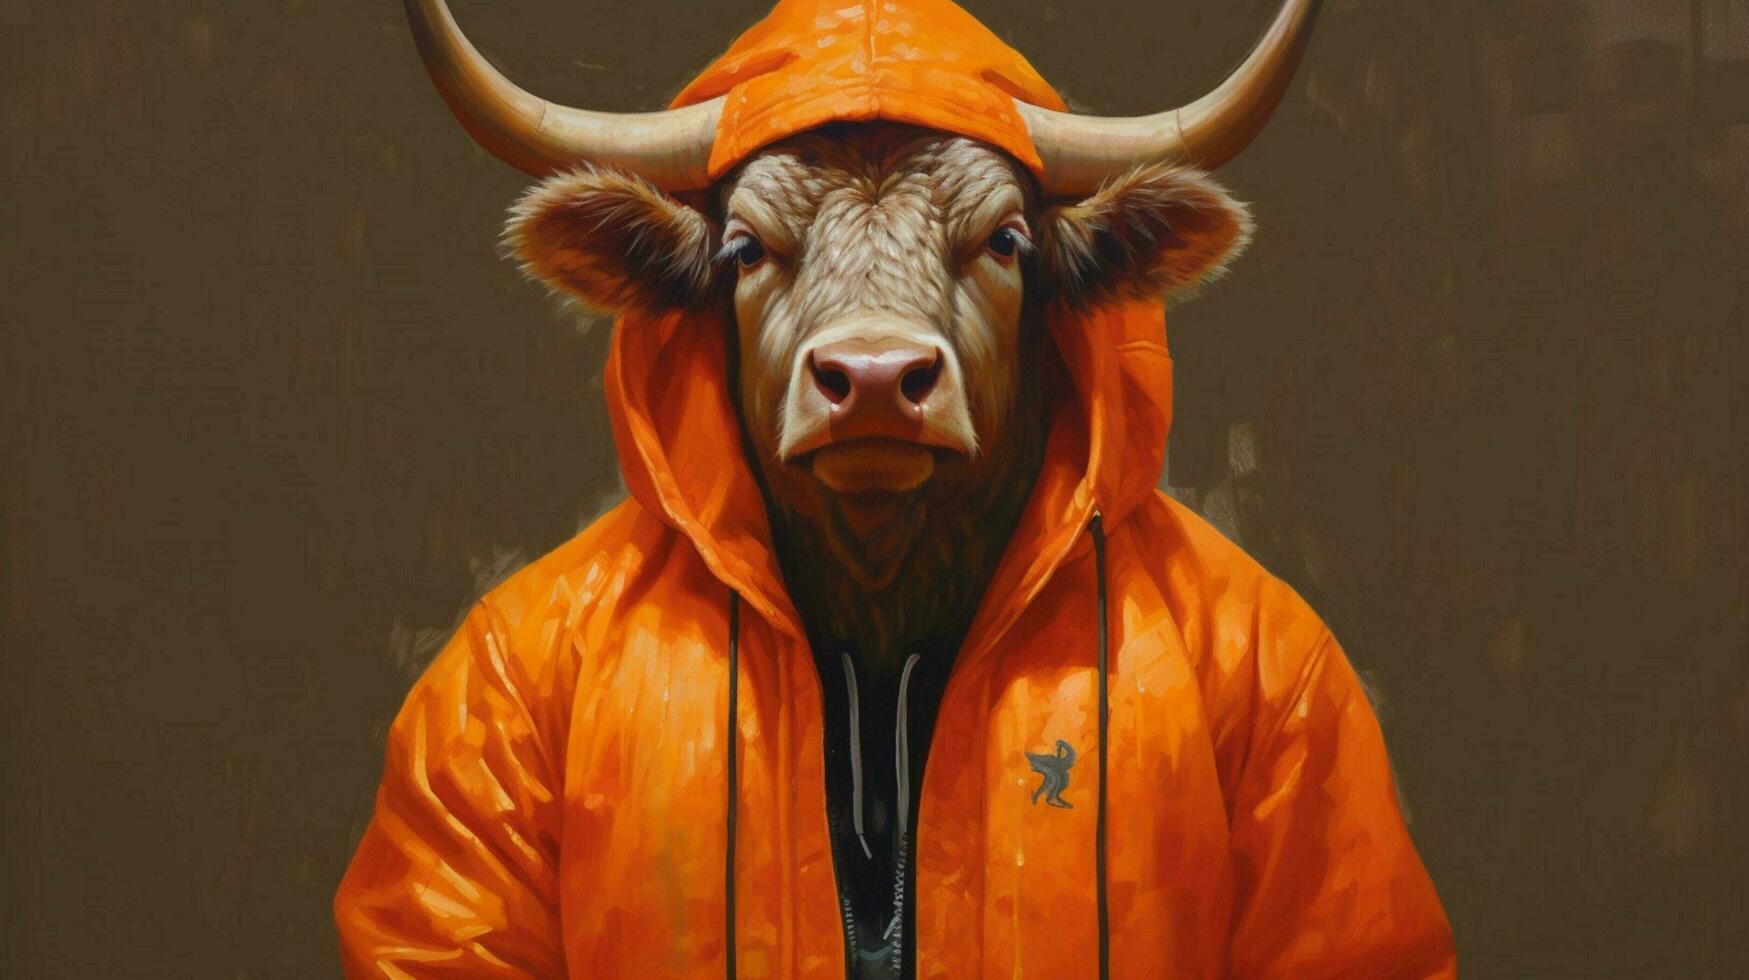 a painting of a bull wearing an orange jacket photo